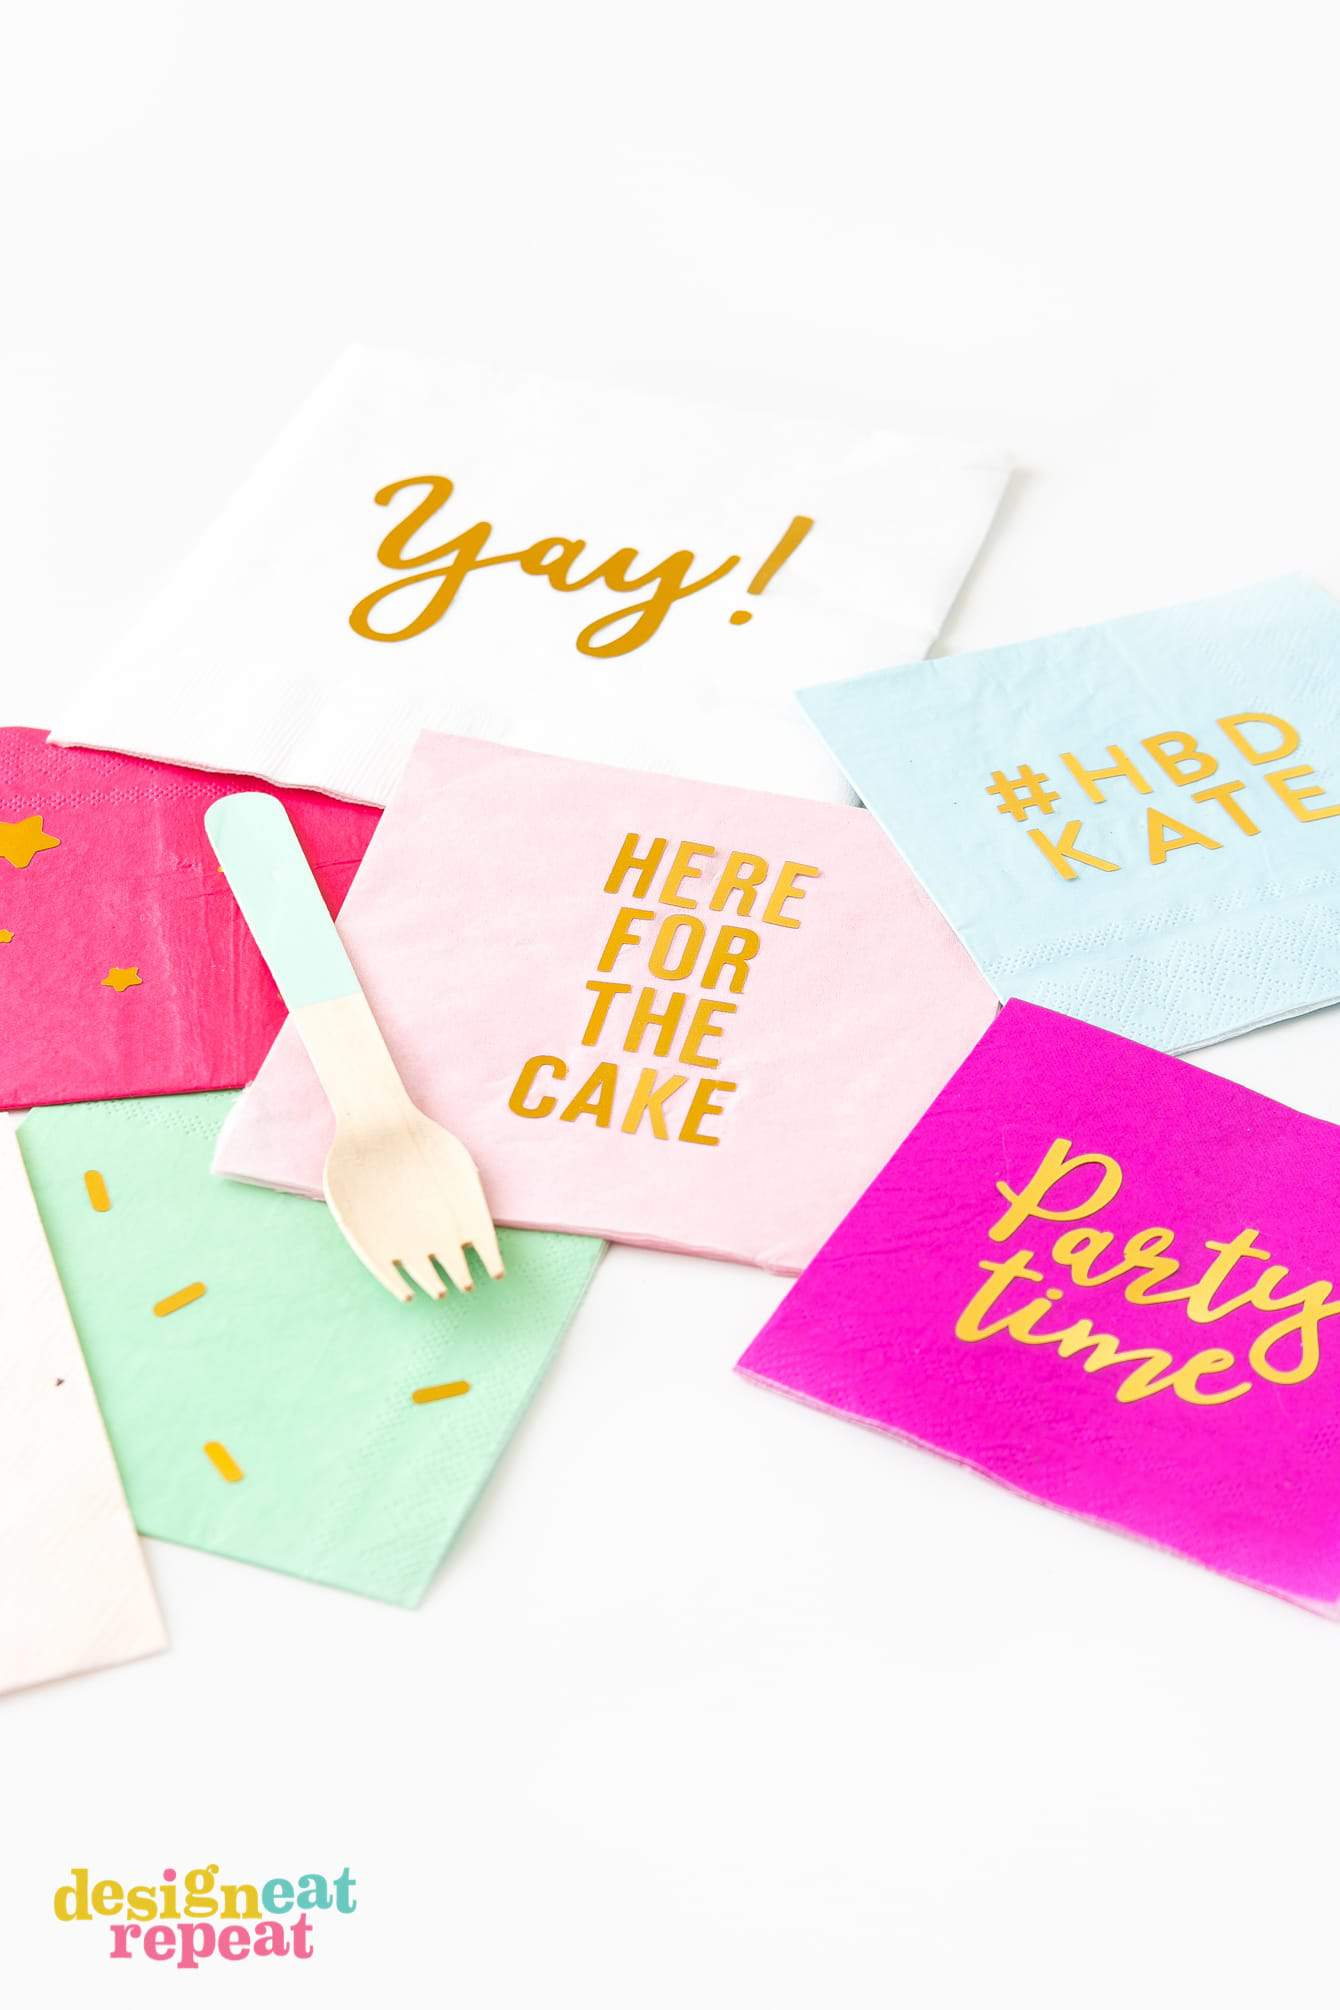 Pink gold foil DIY napkins that say "here for the cake", "yay", and "party time".